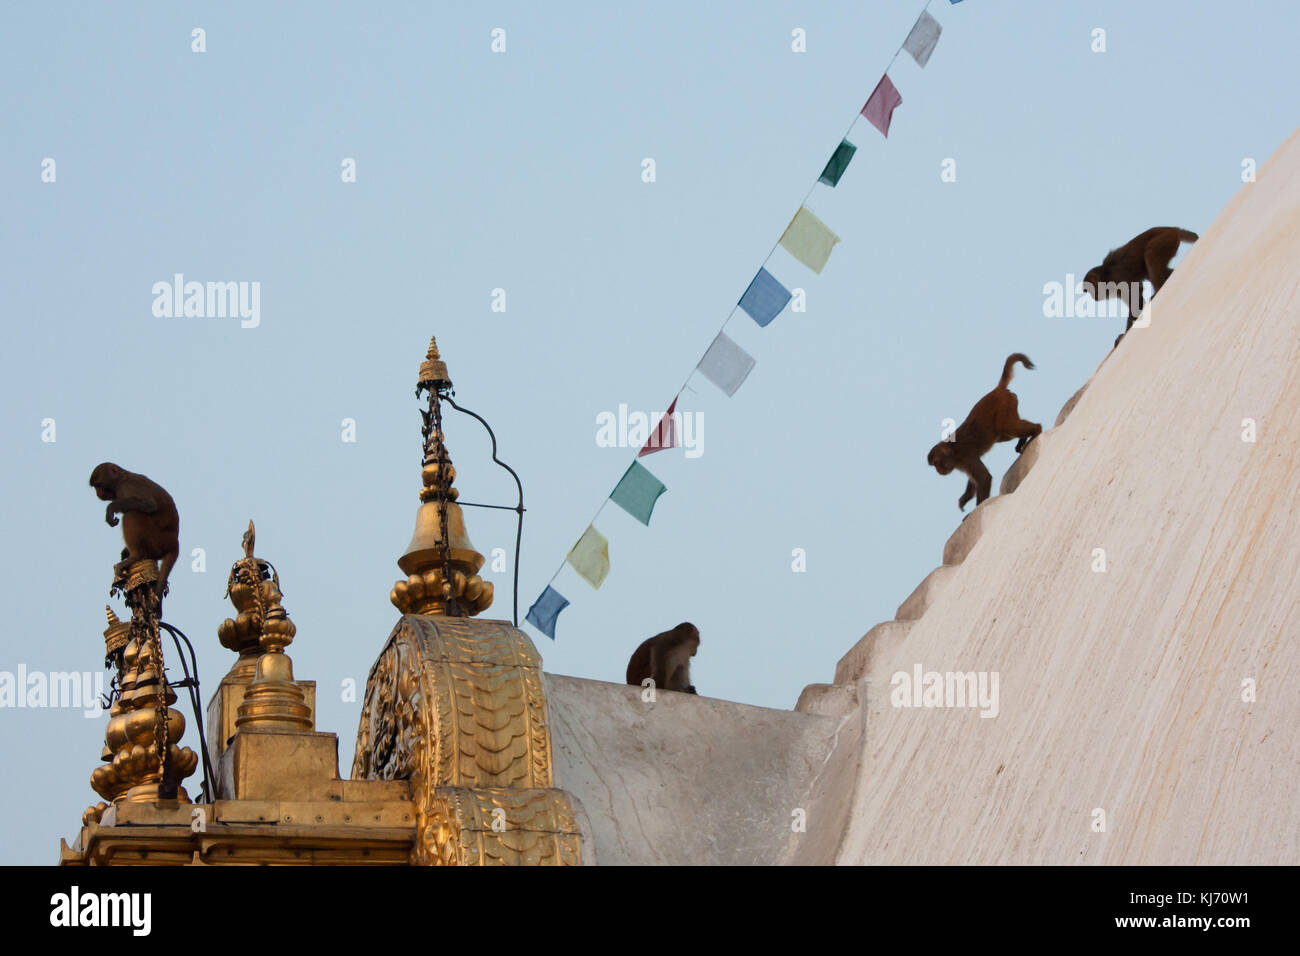 Swayambhunath (or Monkey Temple), is an ancient religious architecture atop a hill in the Kathmandu Valley. Nepal. Stock Photo